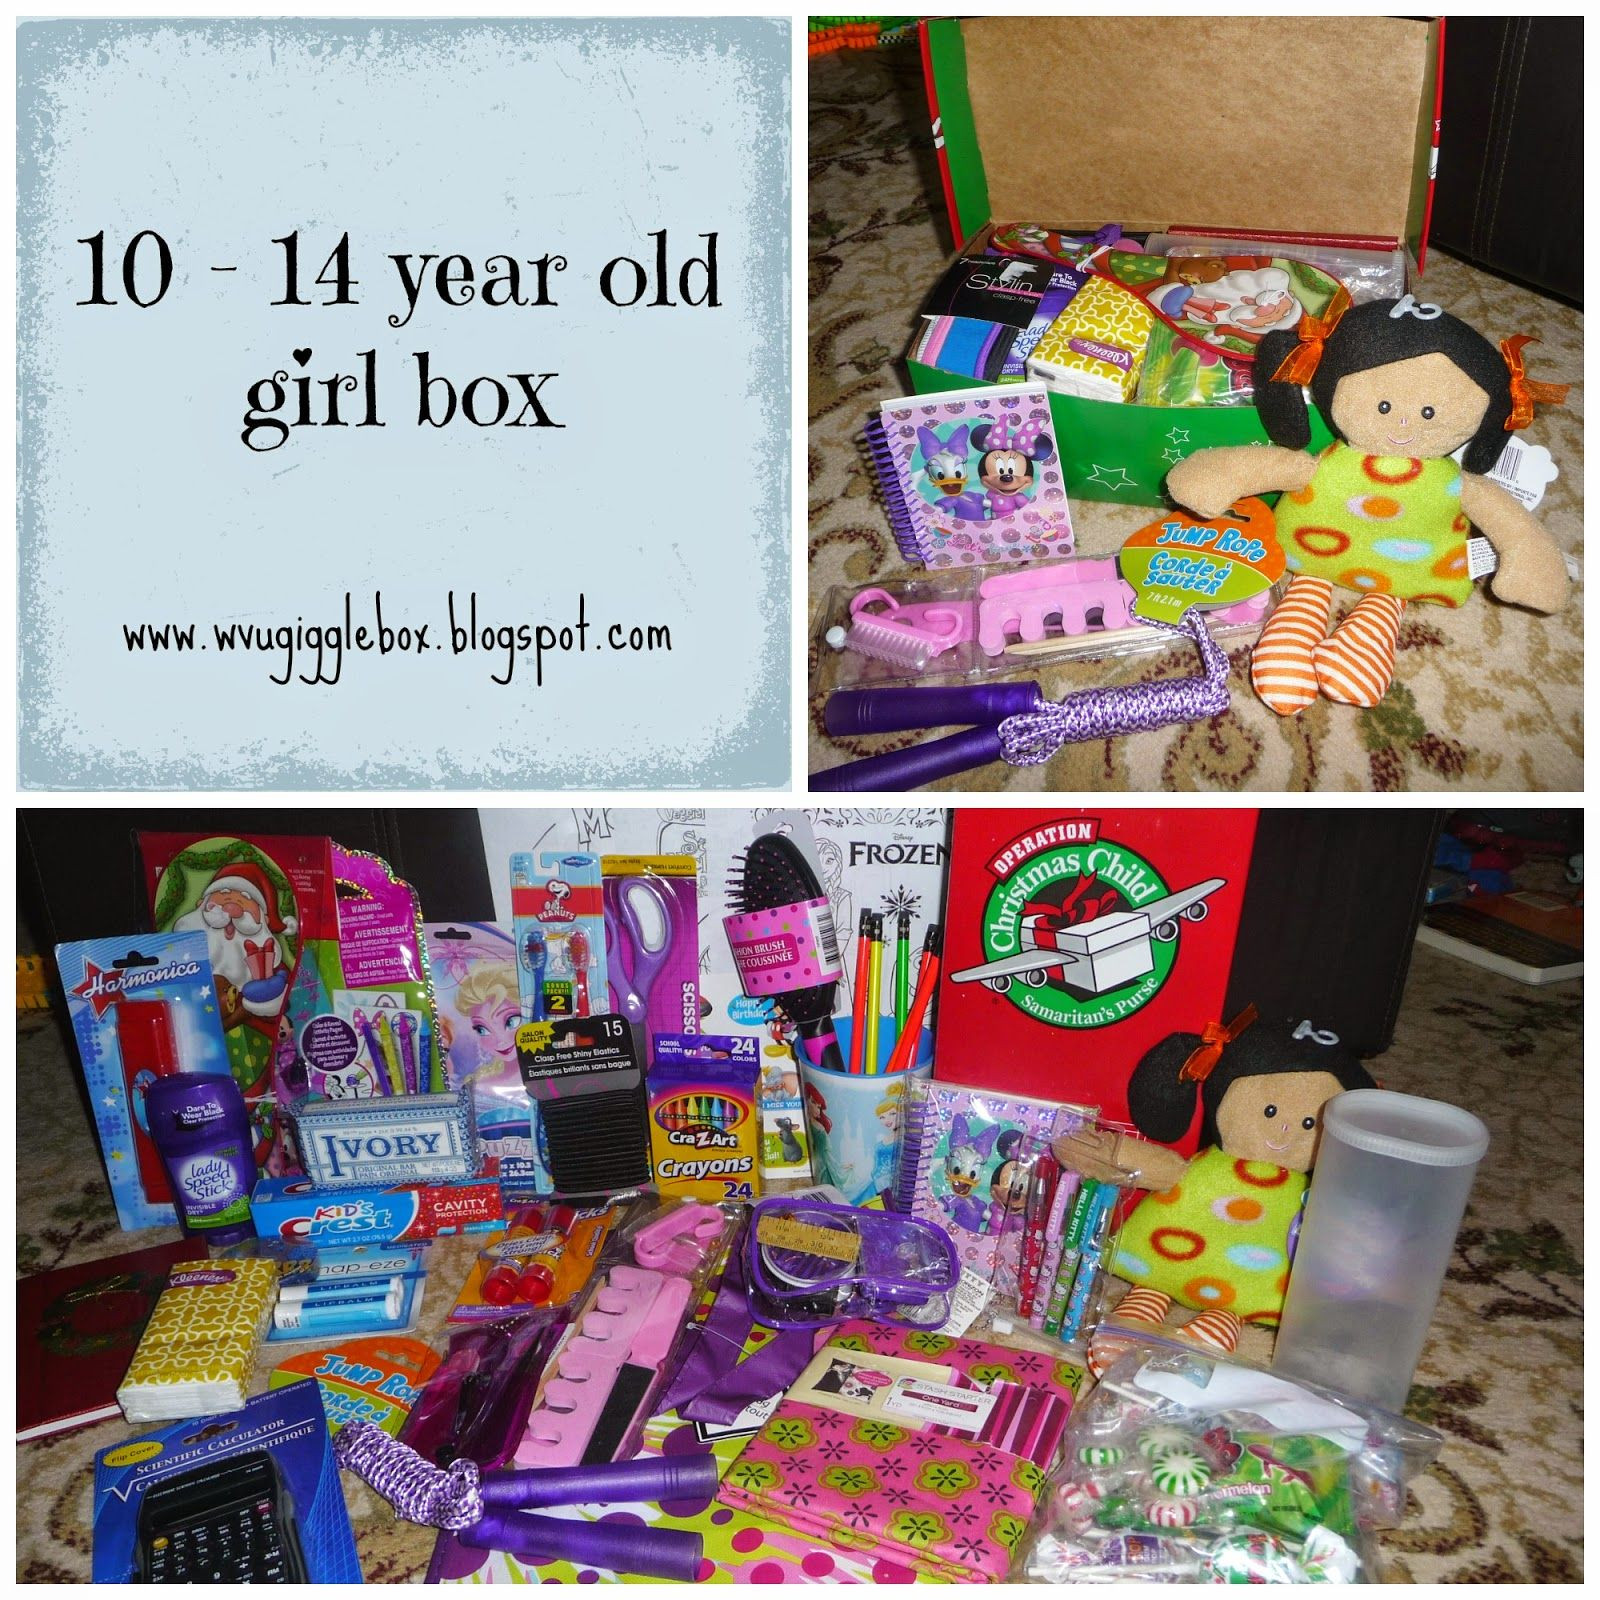 Christmas Gift Ideas For 14 Year Old Daughter
 Operation Christmas Child 2014 packing a 10 14 year